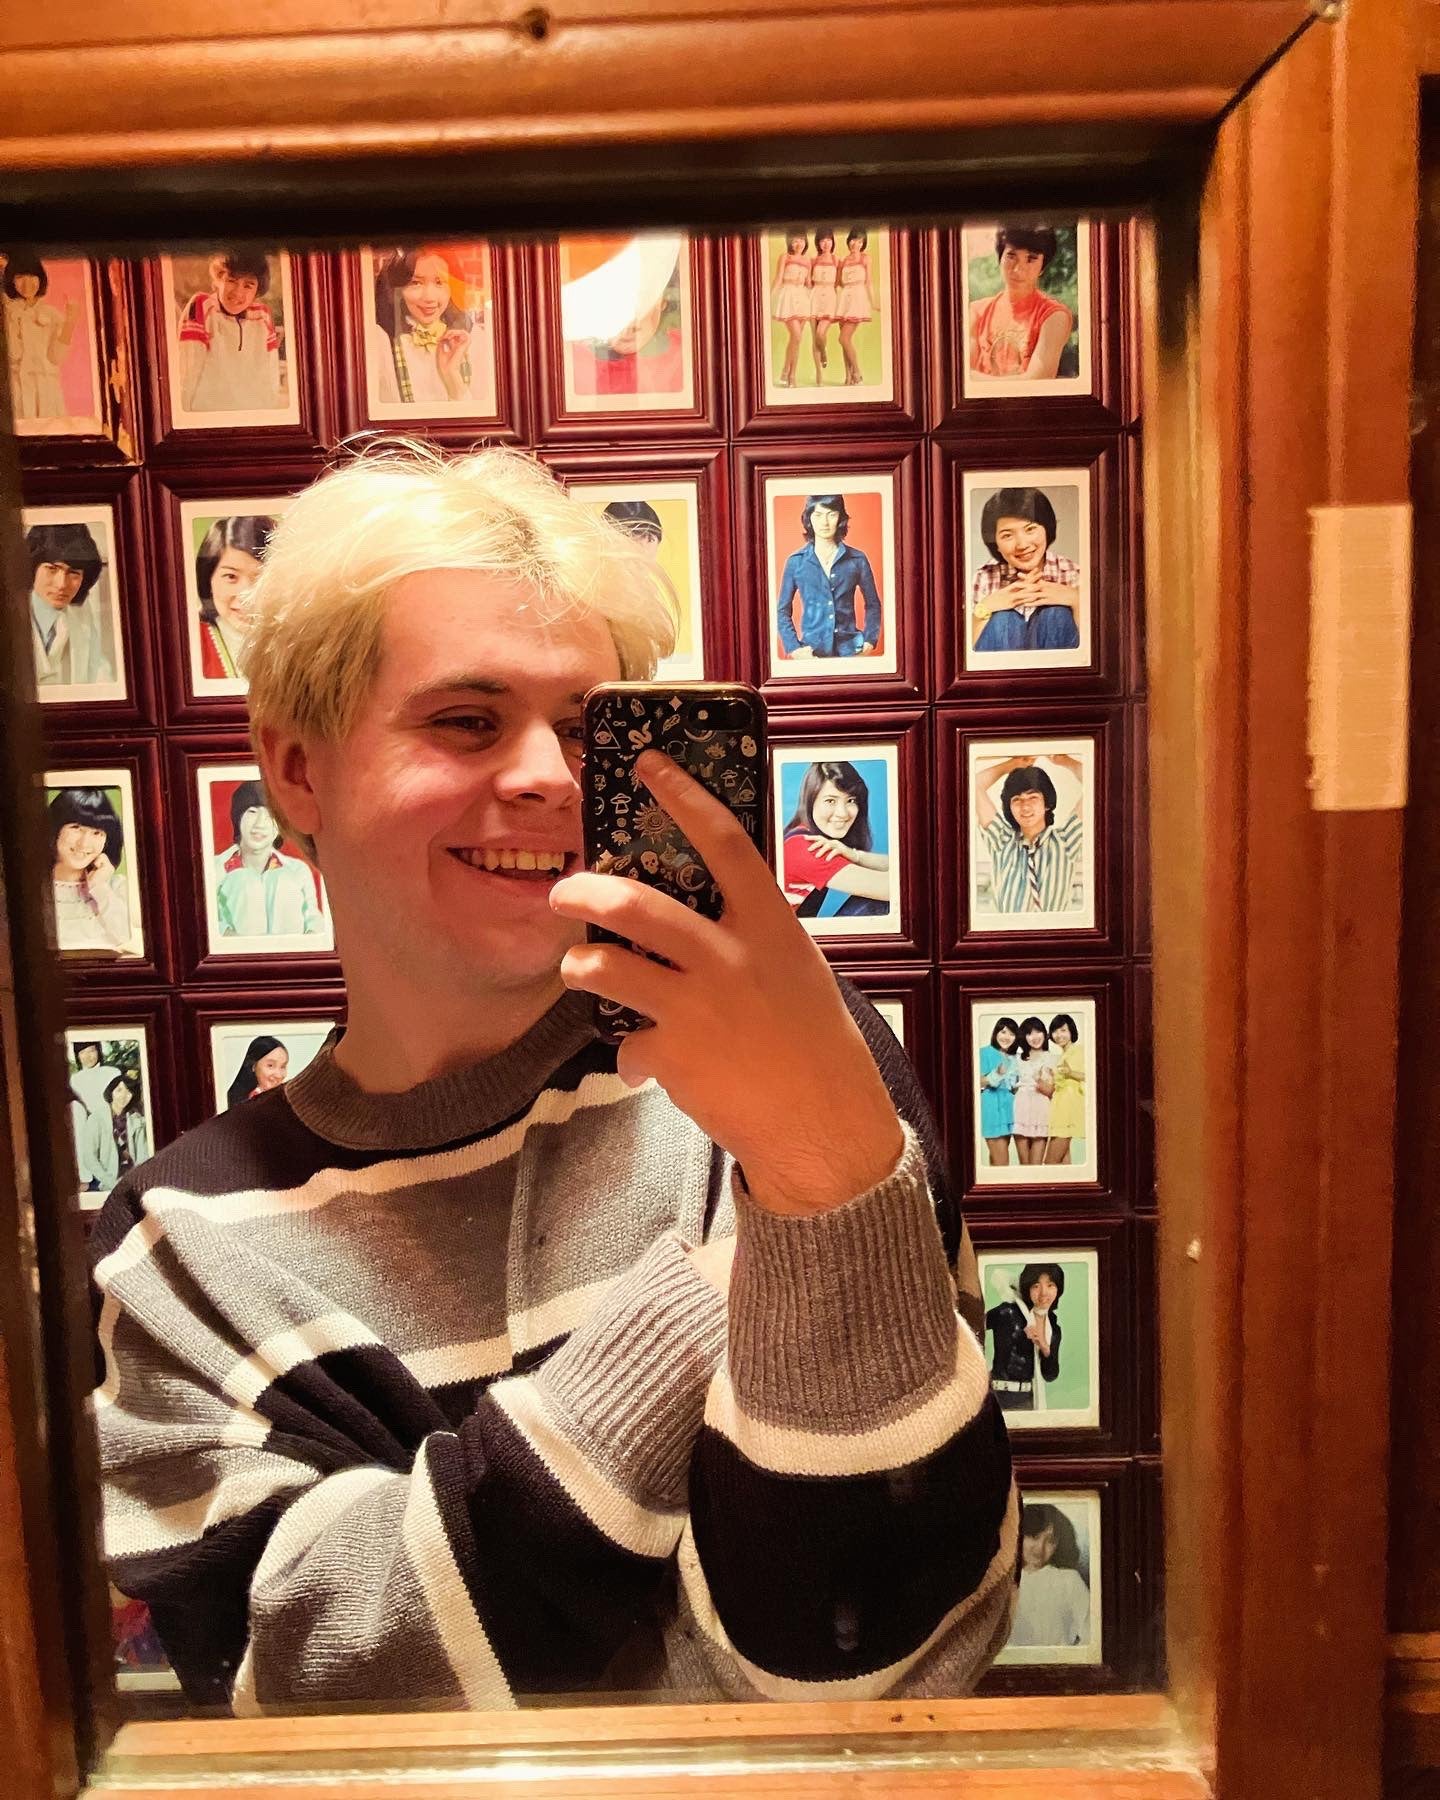 Jack takes a photo in a mirror